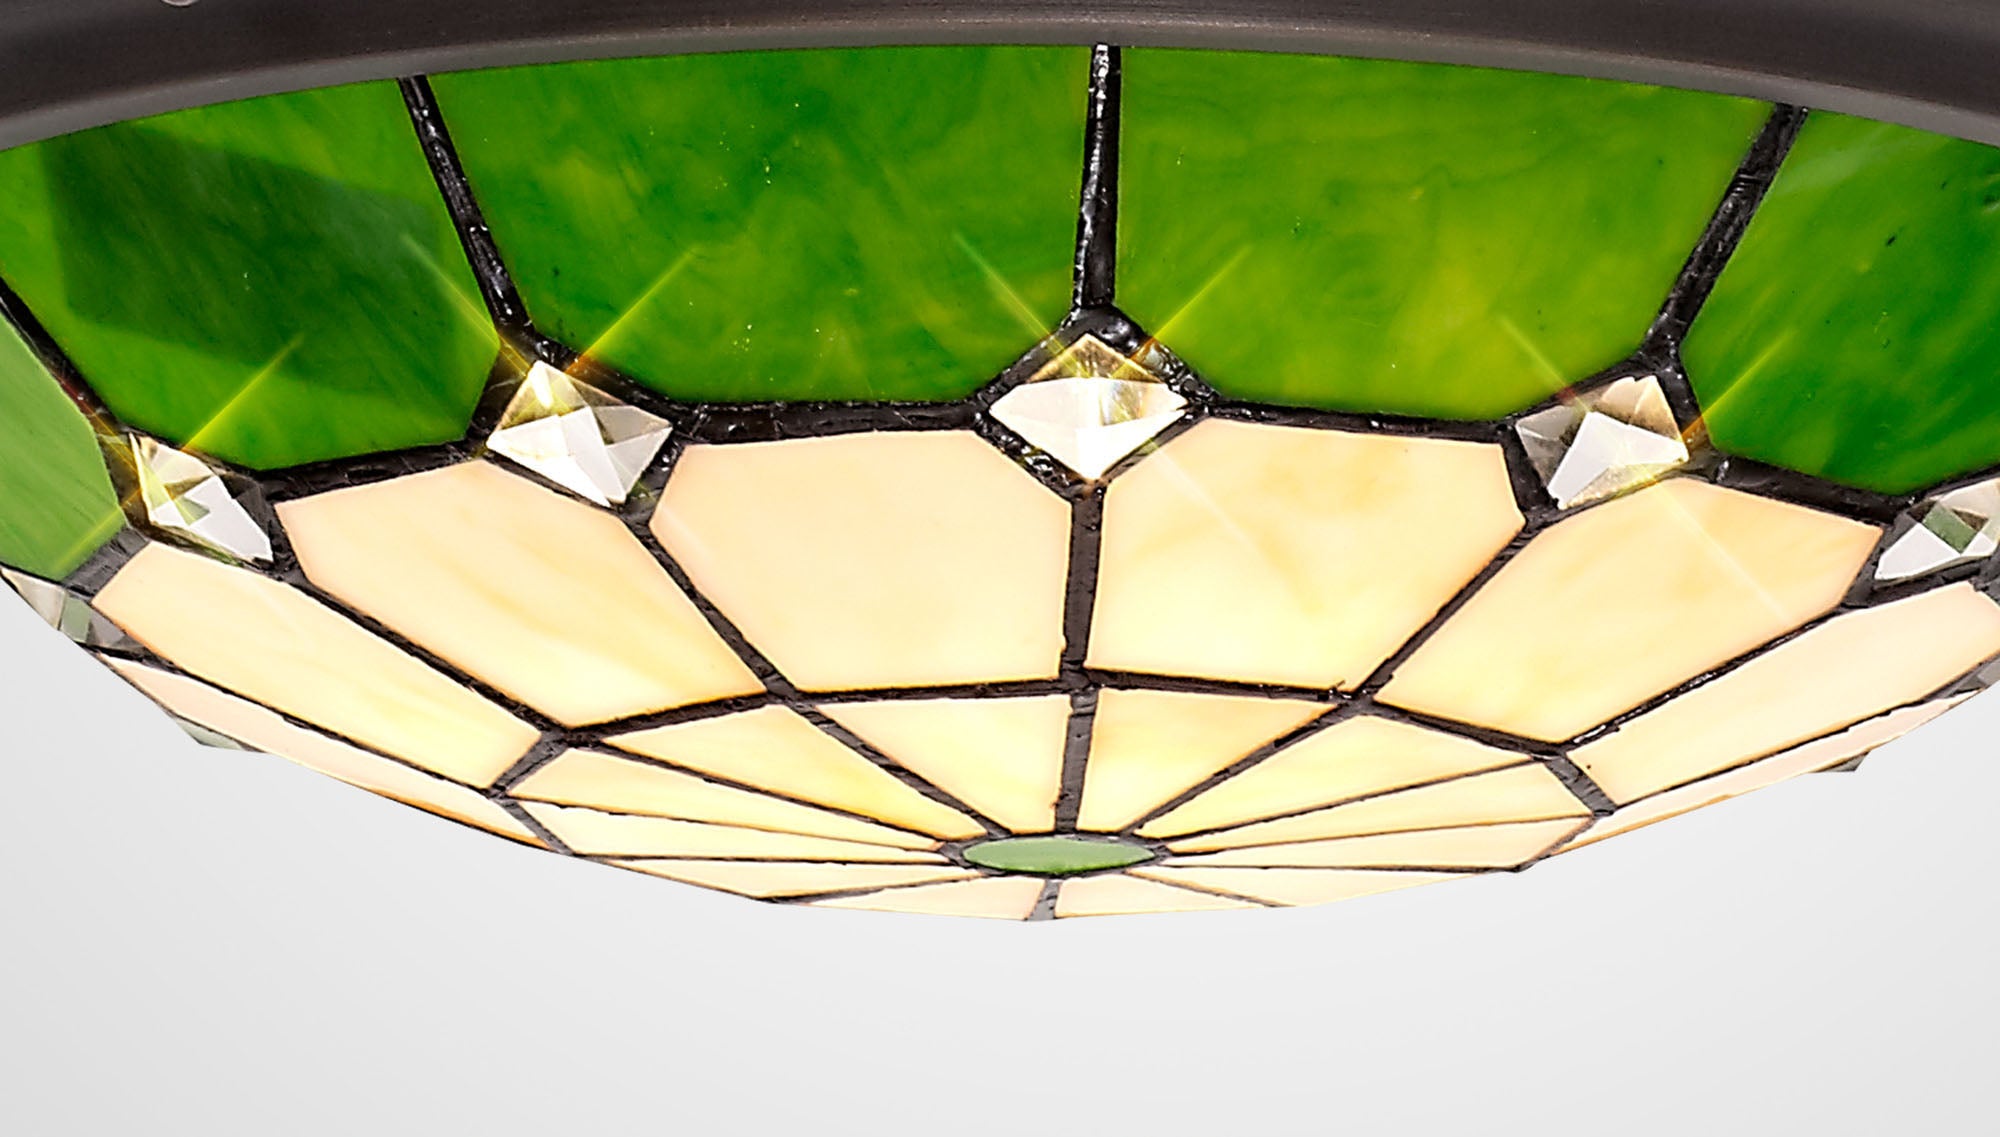 Austiffany, Tiffany 35cm Non-Electric Uplighter Shade, Crealm/Green/Clear Crystal Centre/Aged Antique Brass Trim